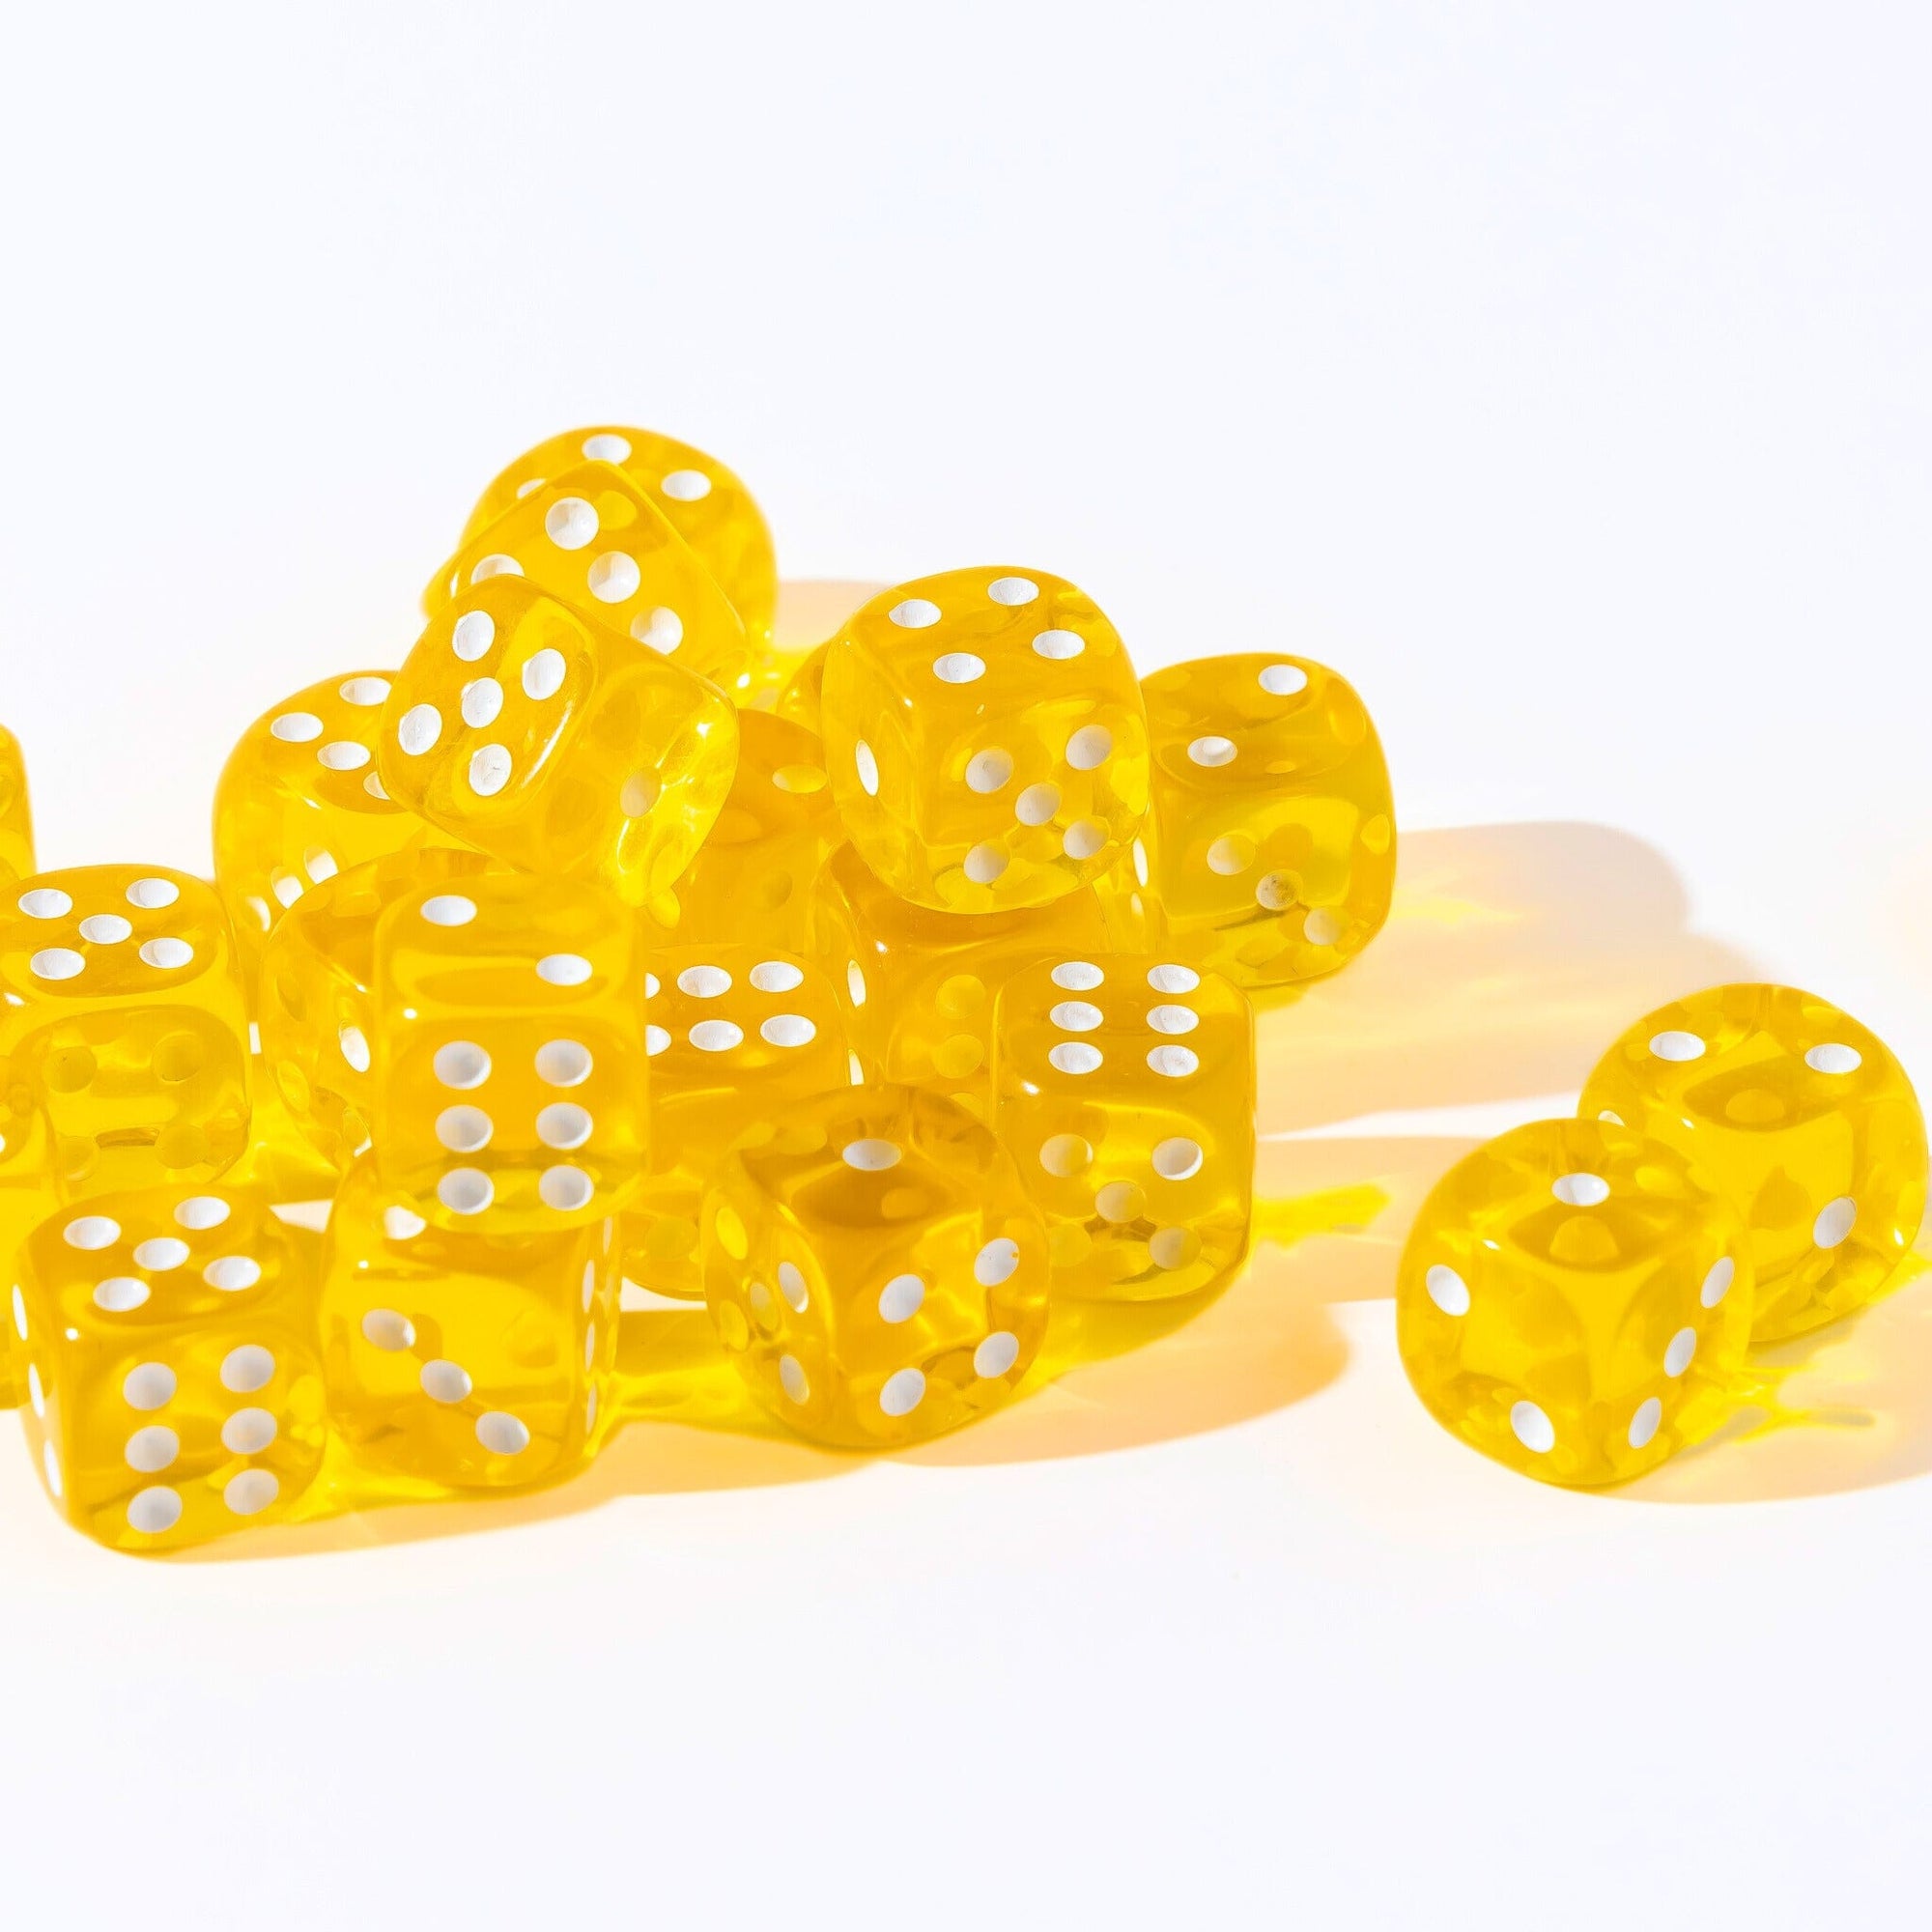 12mm D6 - Translucent Yellow - 25 Count Bag